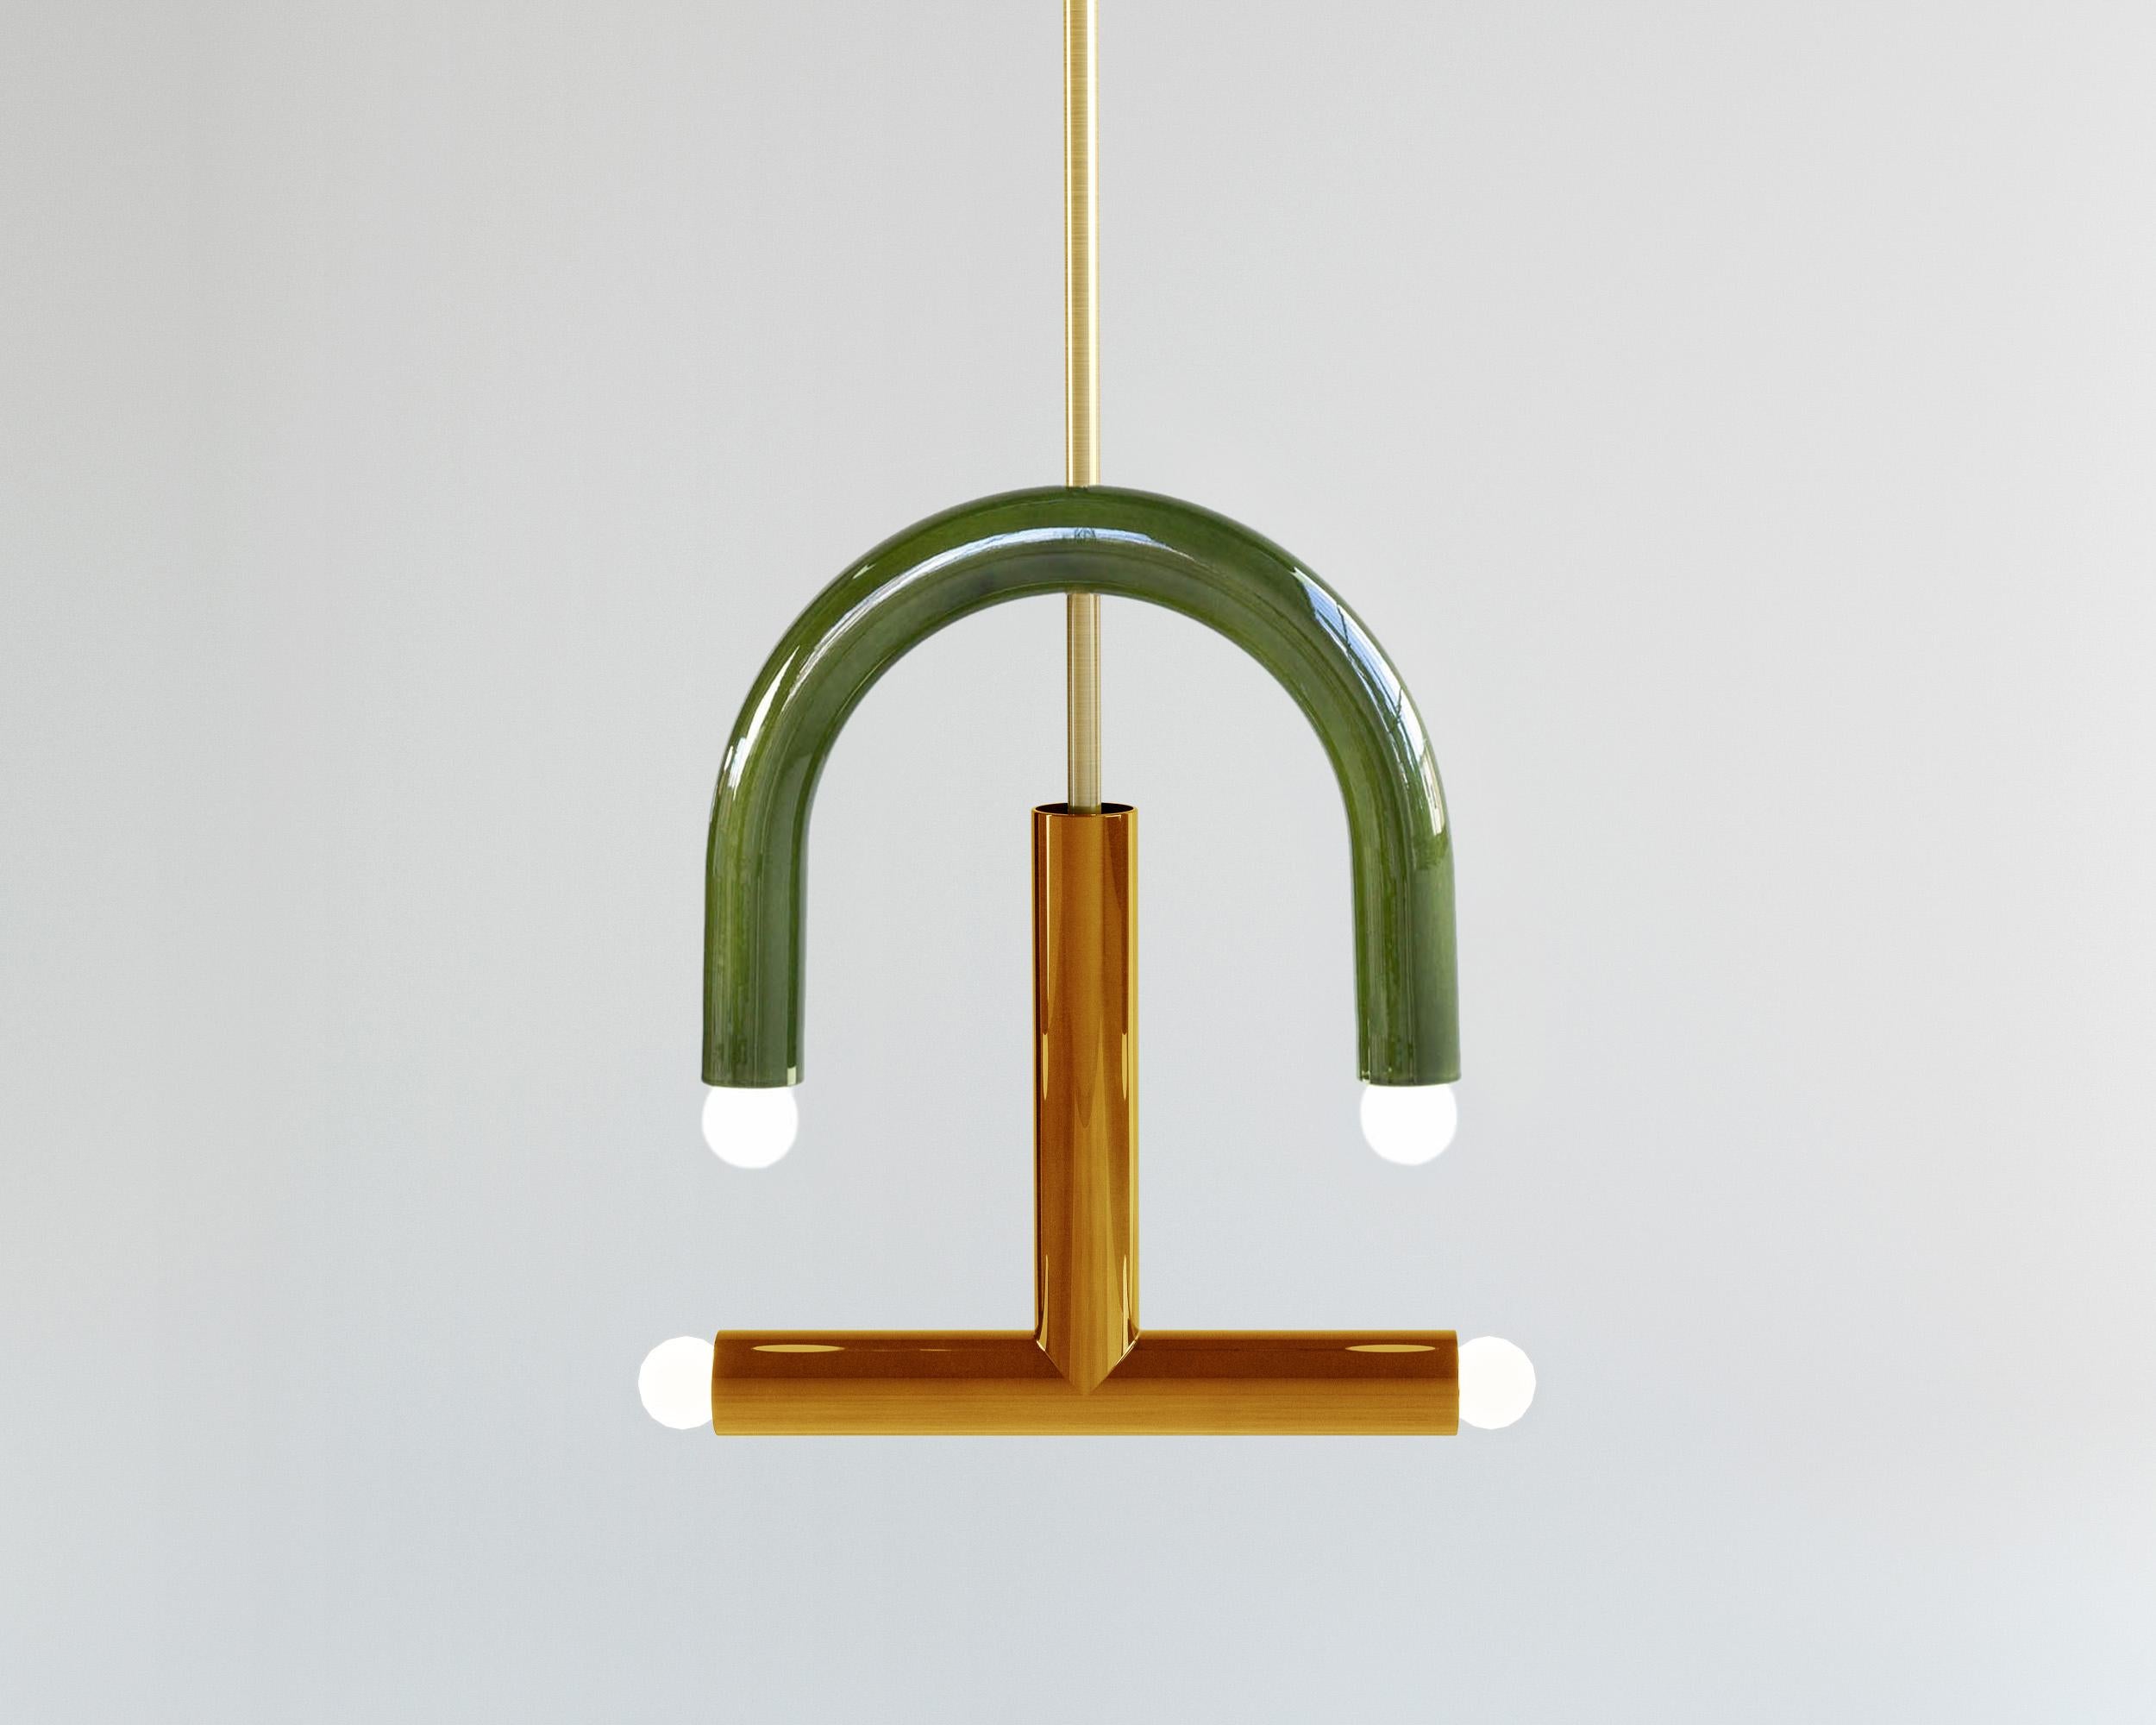 TRN C3 Pendant lamp / ceiling lamp / chandelier 
Designer: Pani Jurek

Dimensions: H 45 x 35 x 5 cm
Model shown: Cobalt blue

Bulb (not included): E27/E26, compatible with US electric system

Materials: Hand glazed ceramic and brass
Rod: brass,